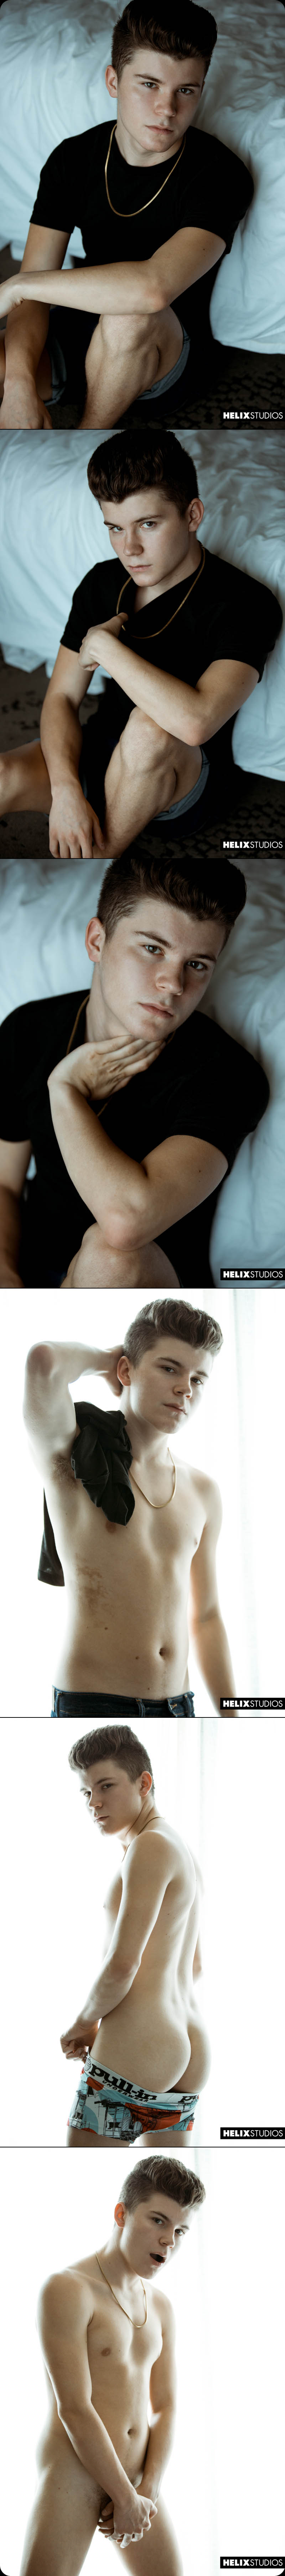 Silas Brooks (a.k.a. Baconator) Intimate Photoshoot at Helix Studios